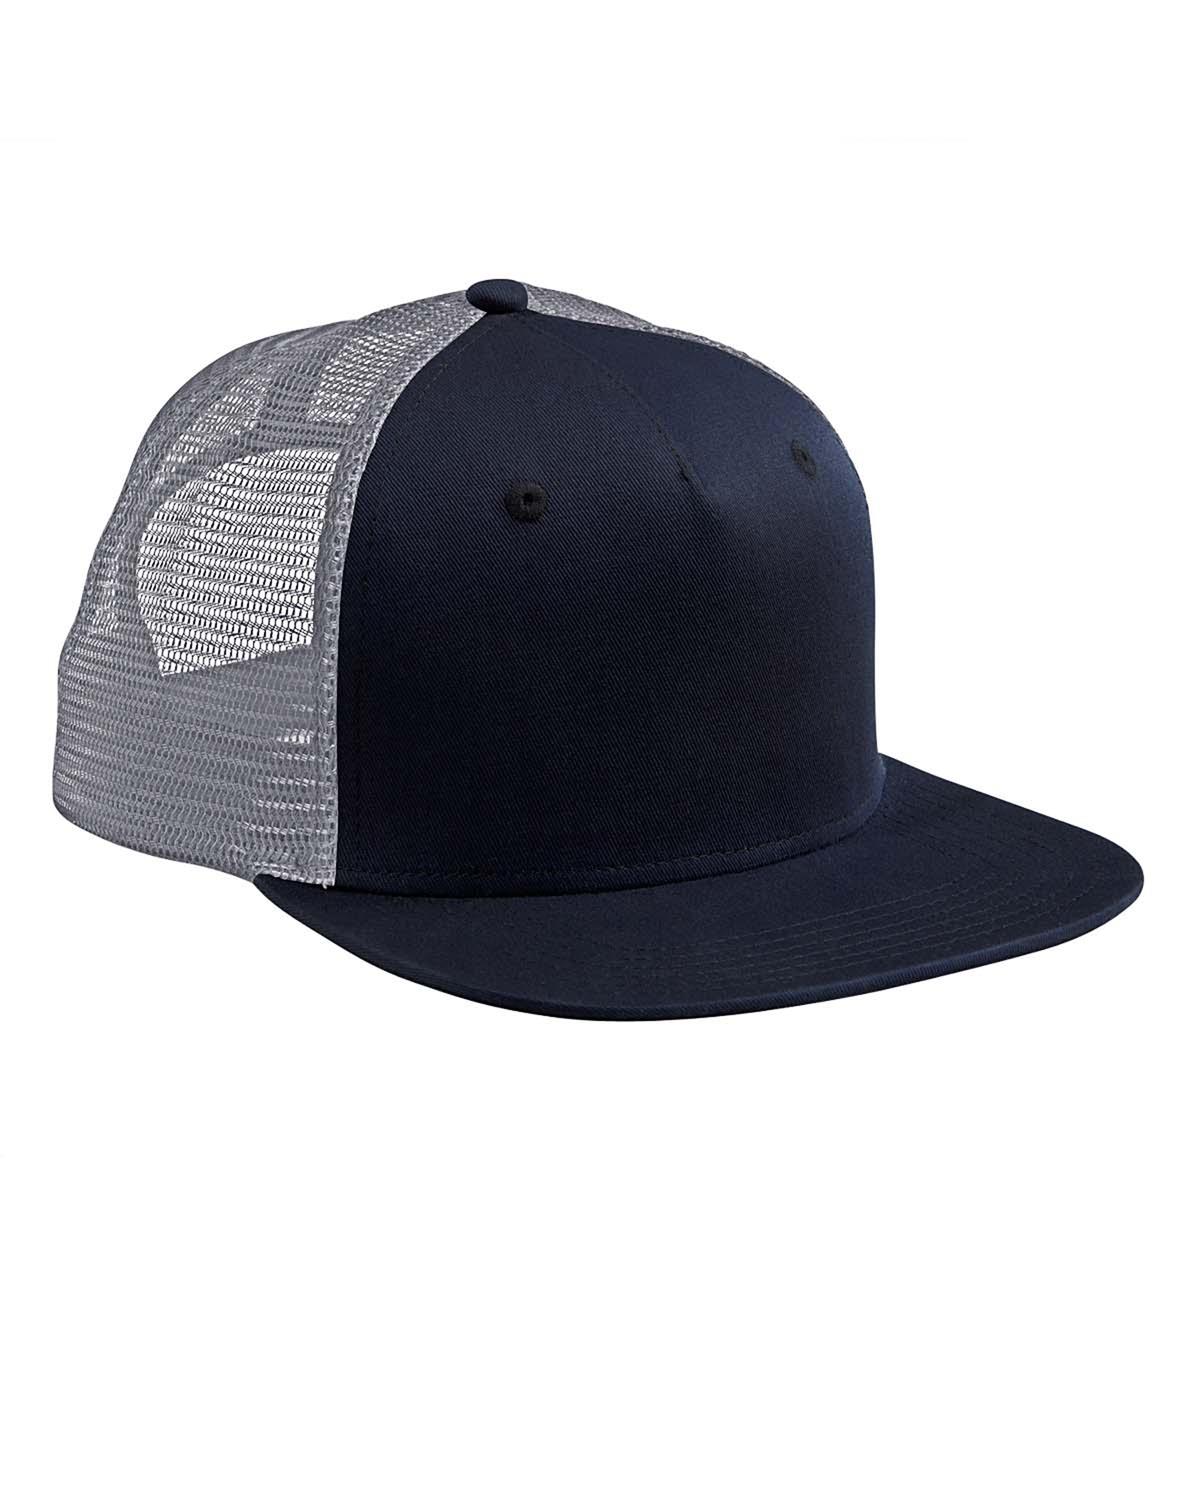 click to view NAVY/GREY